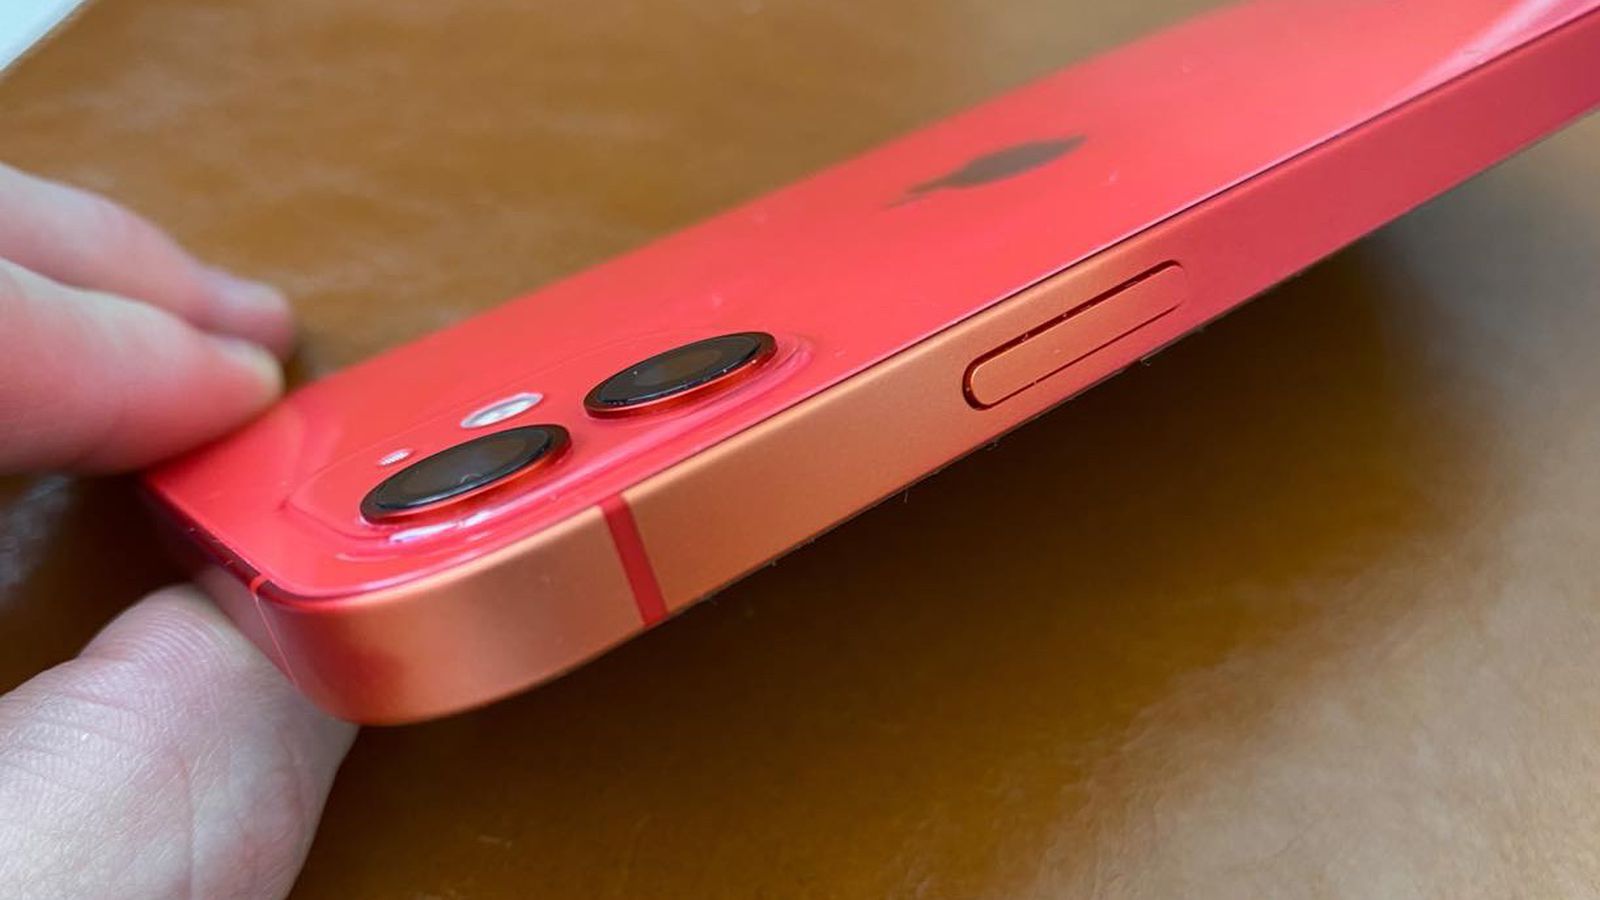 Some models of iPhone 11 and iPhone 12 losing color due to the aluminum body